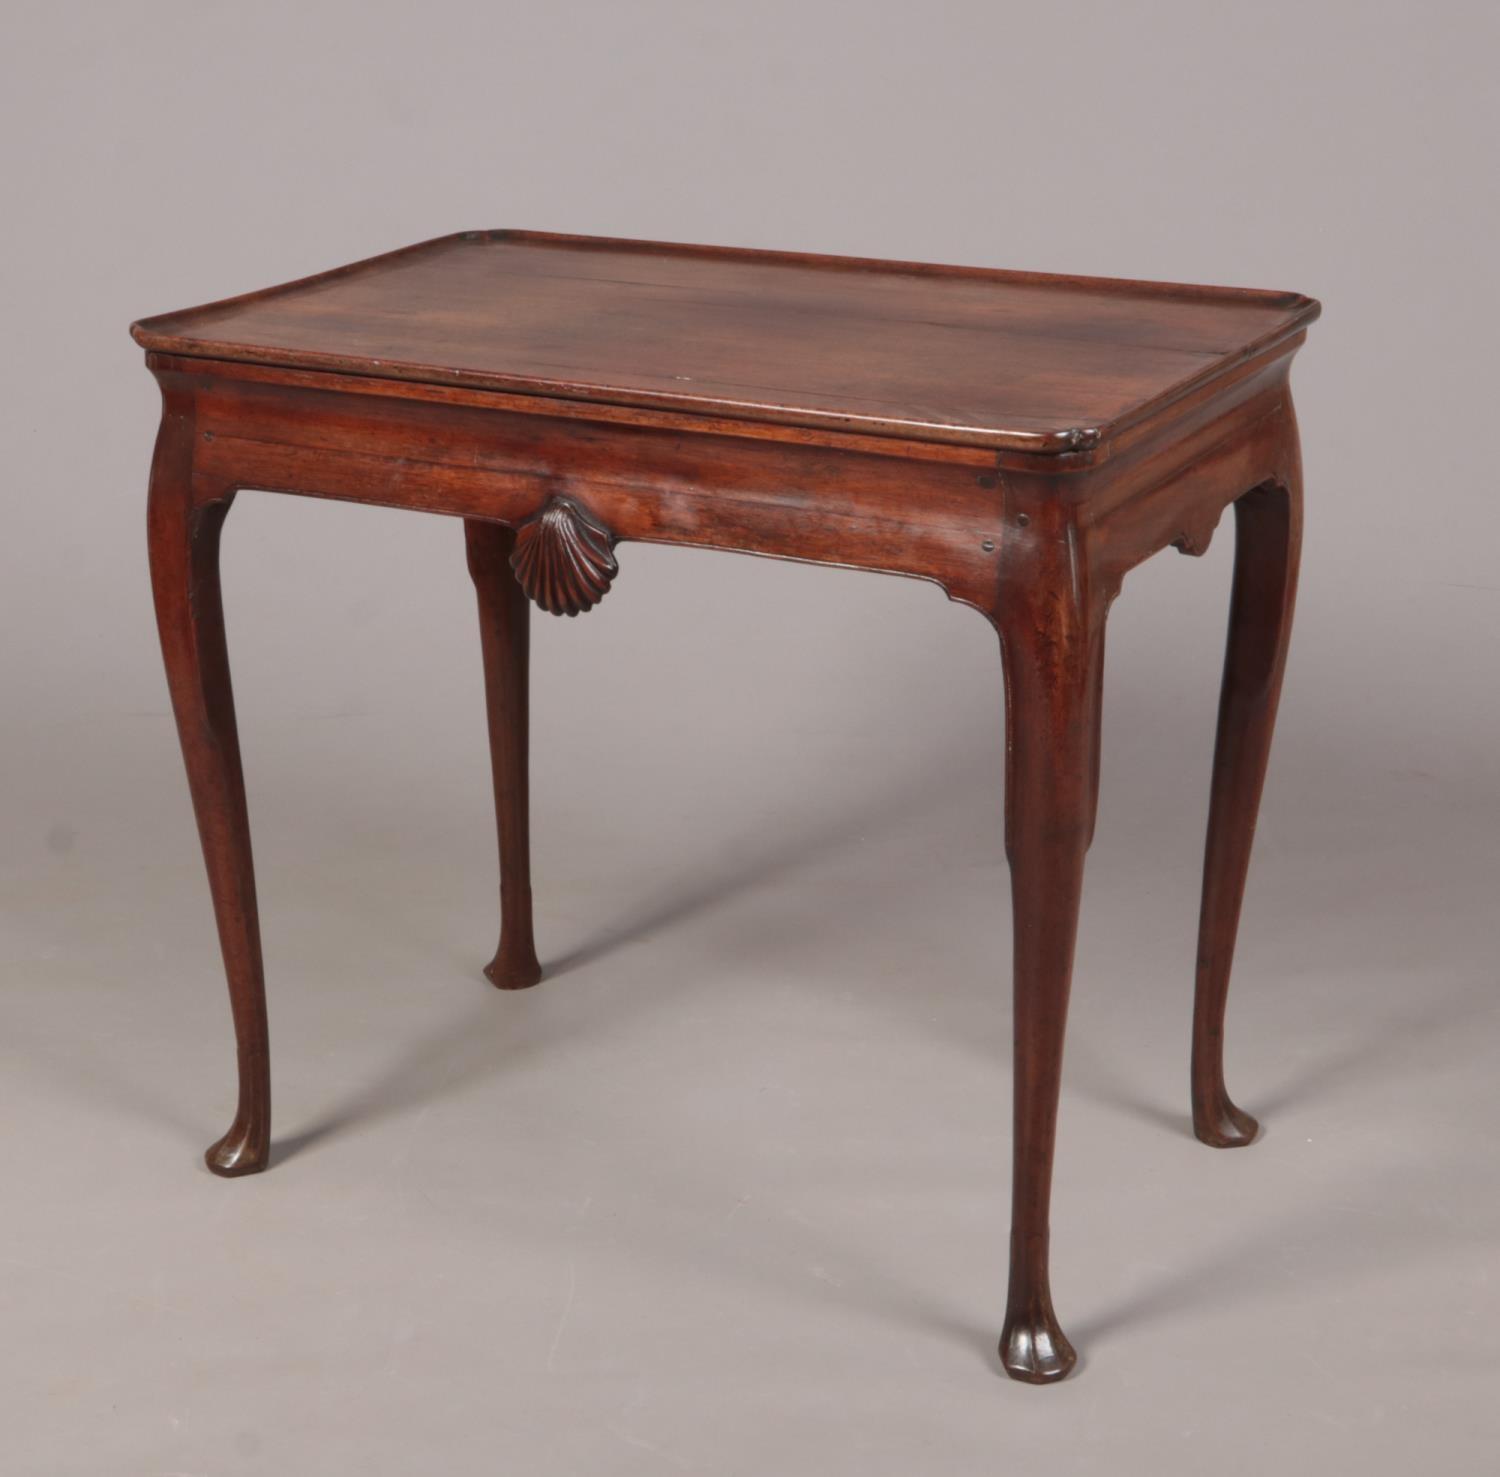 A George II Irish mahogany silver table with notched rectangular dish top. With a pair of carved